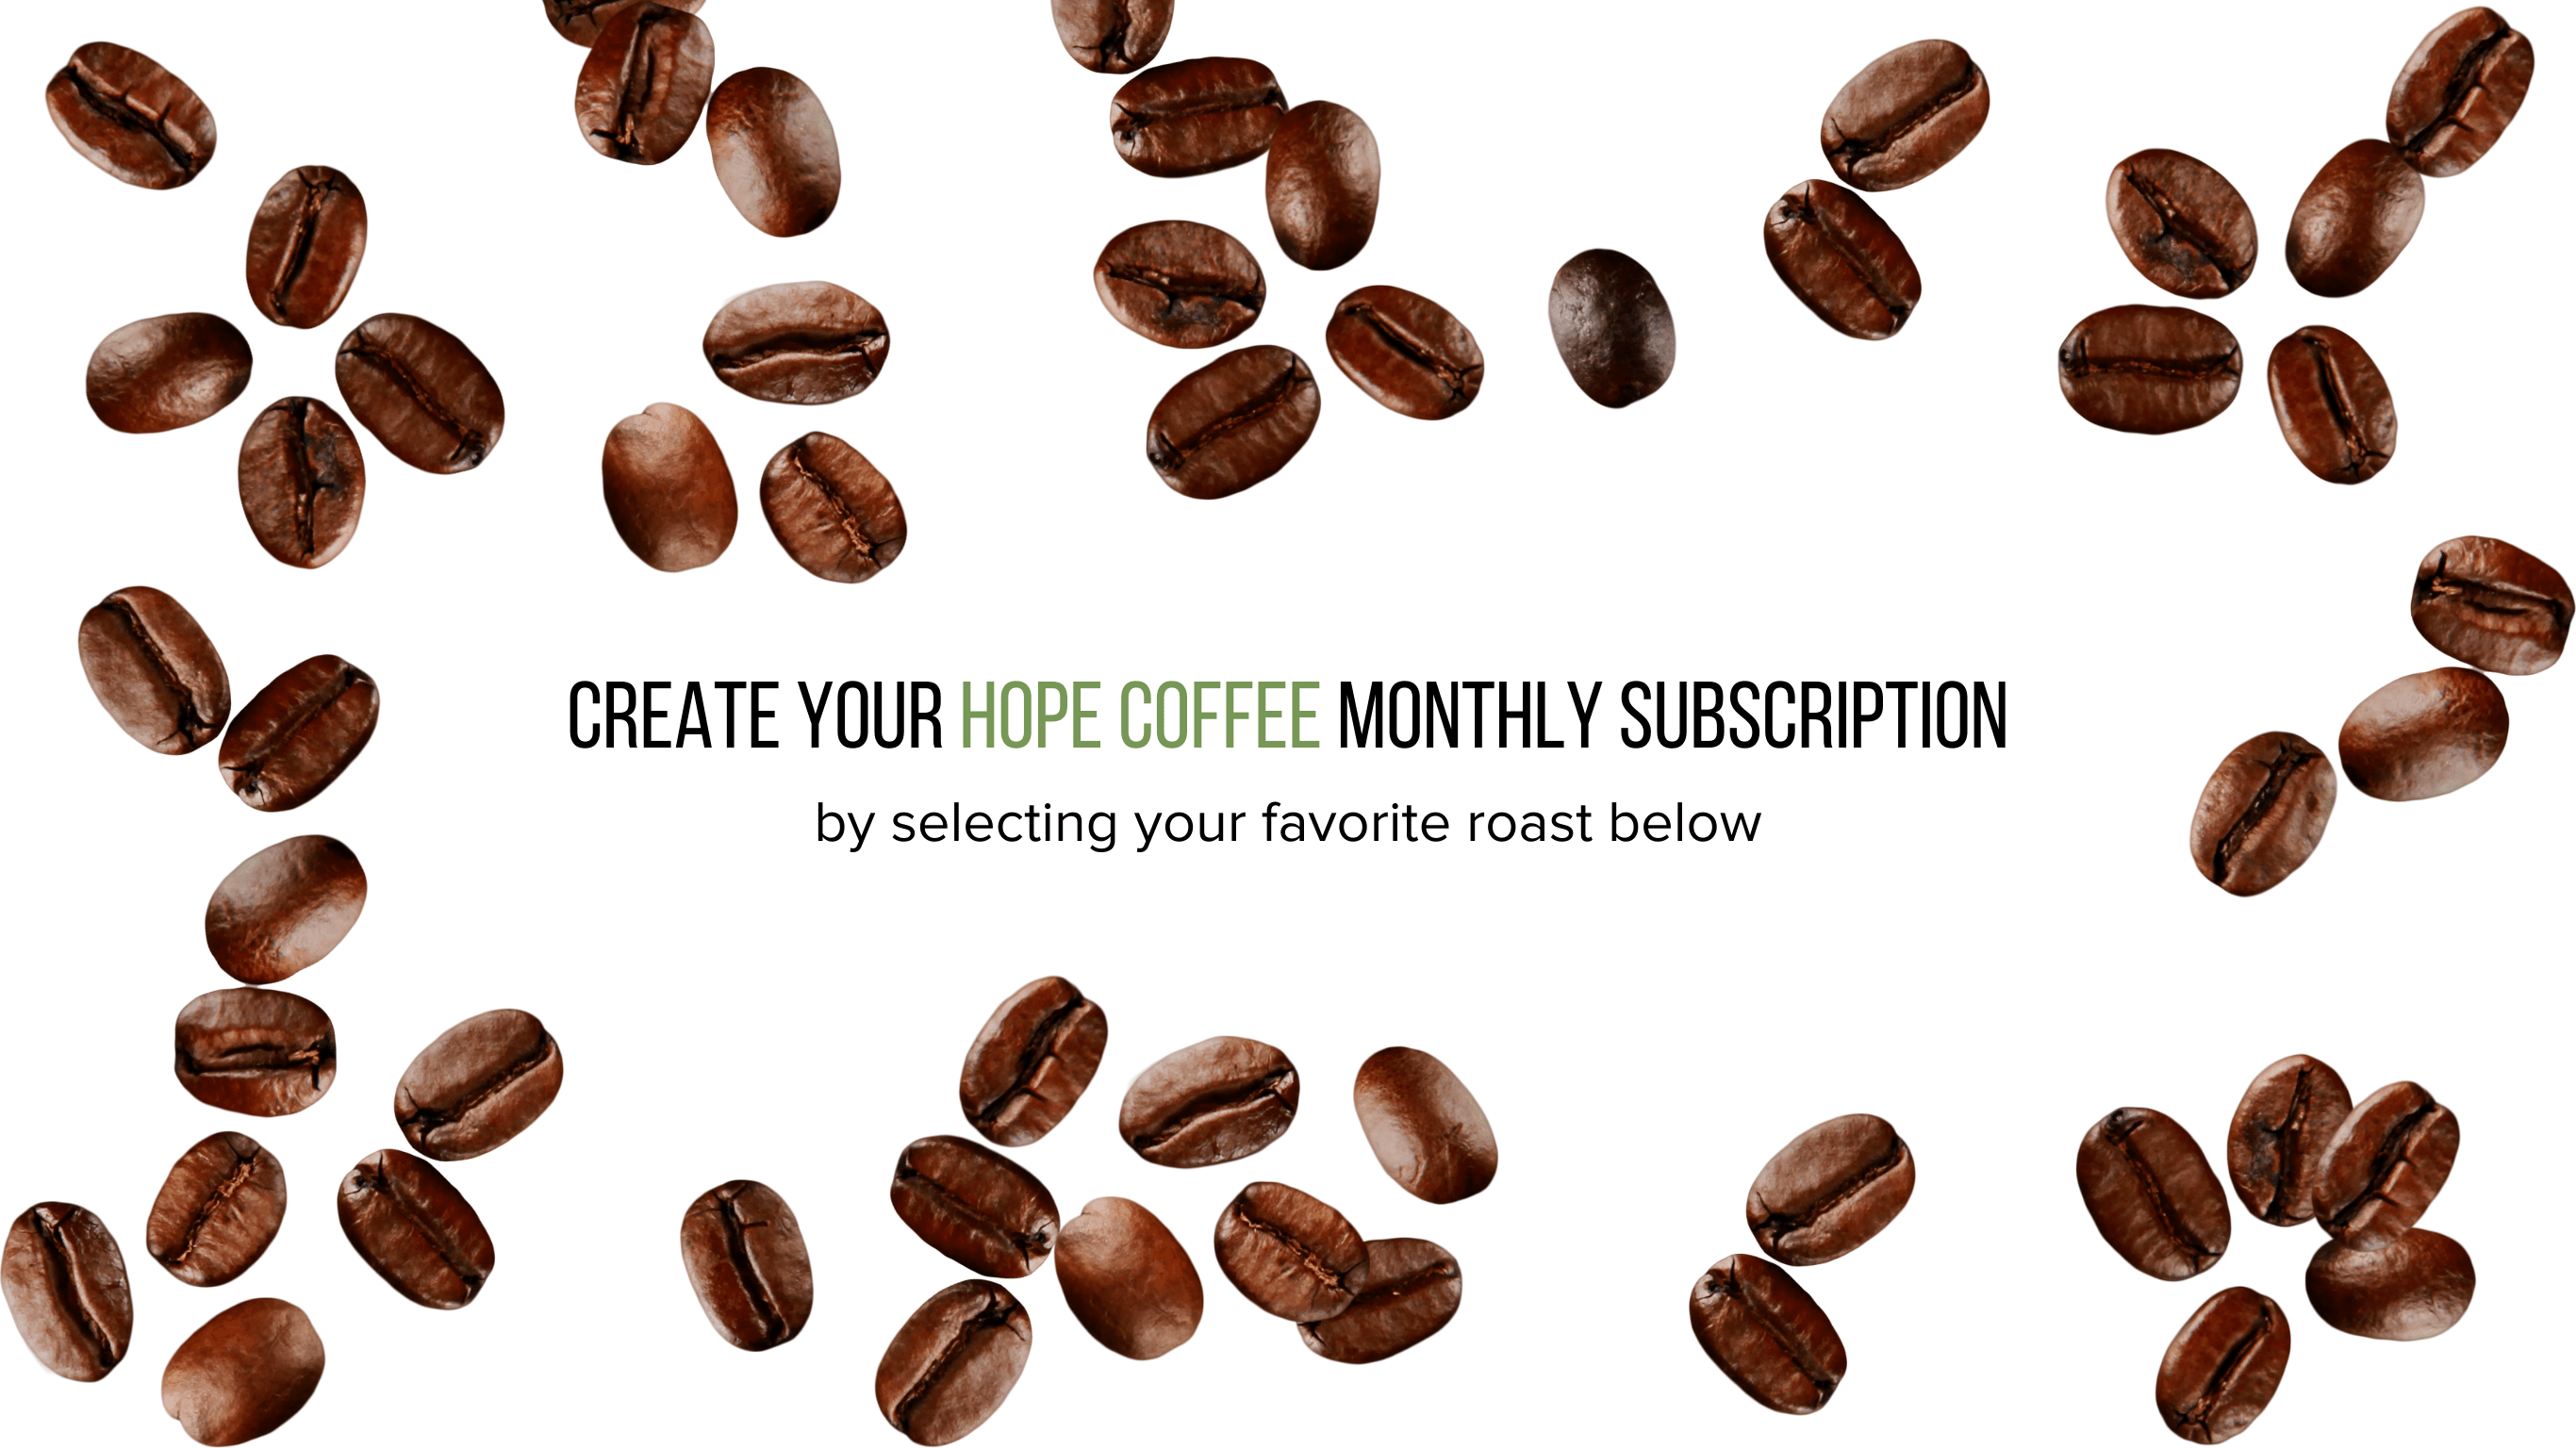 Monthly Coffee Subscription Fair Trade Direct Trade Charity Cause Based Christian Mission